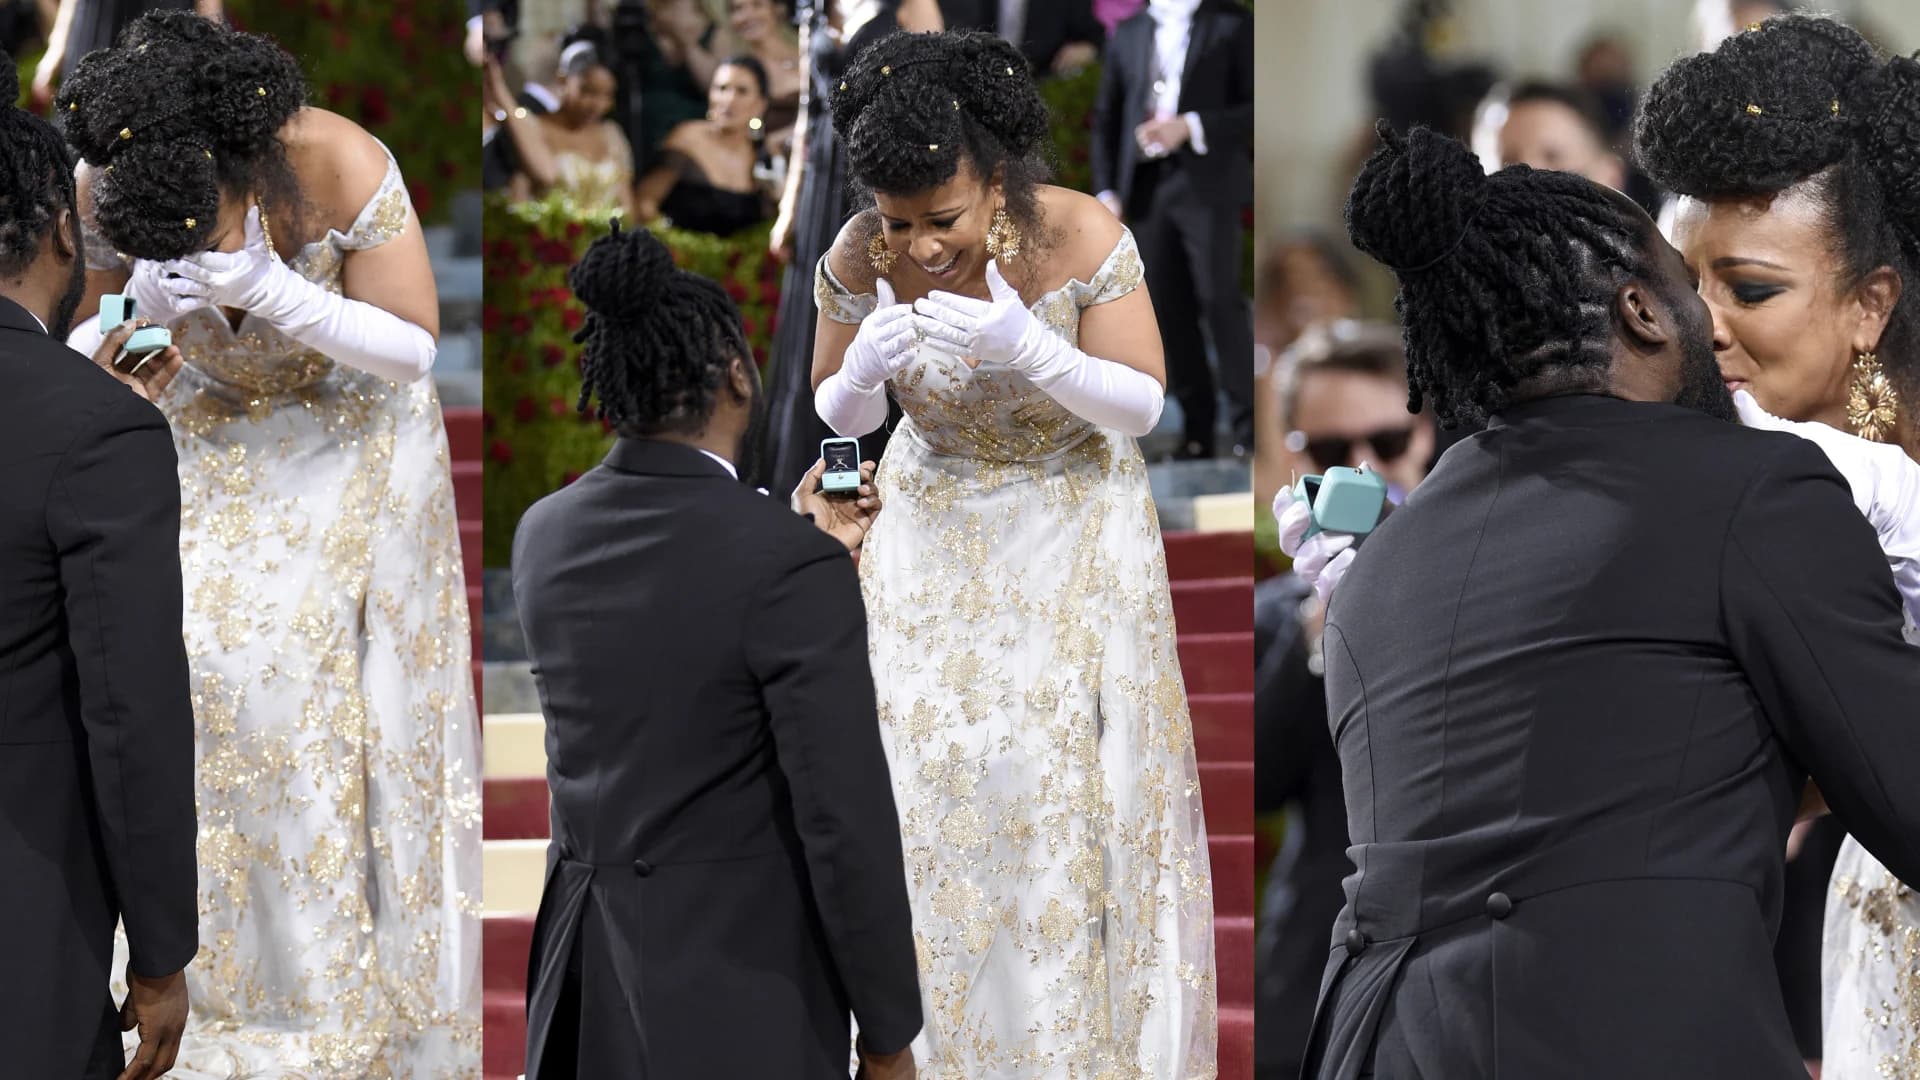 Met Gala moment | Red carpet proposal sparks cheers, joy